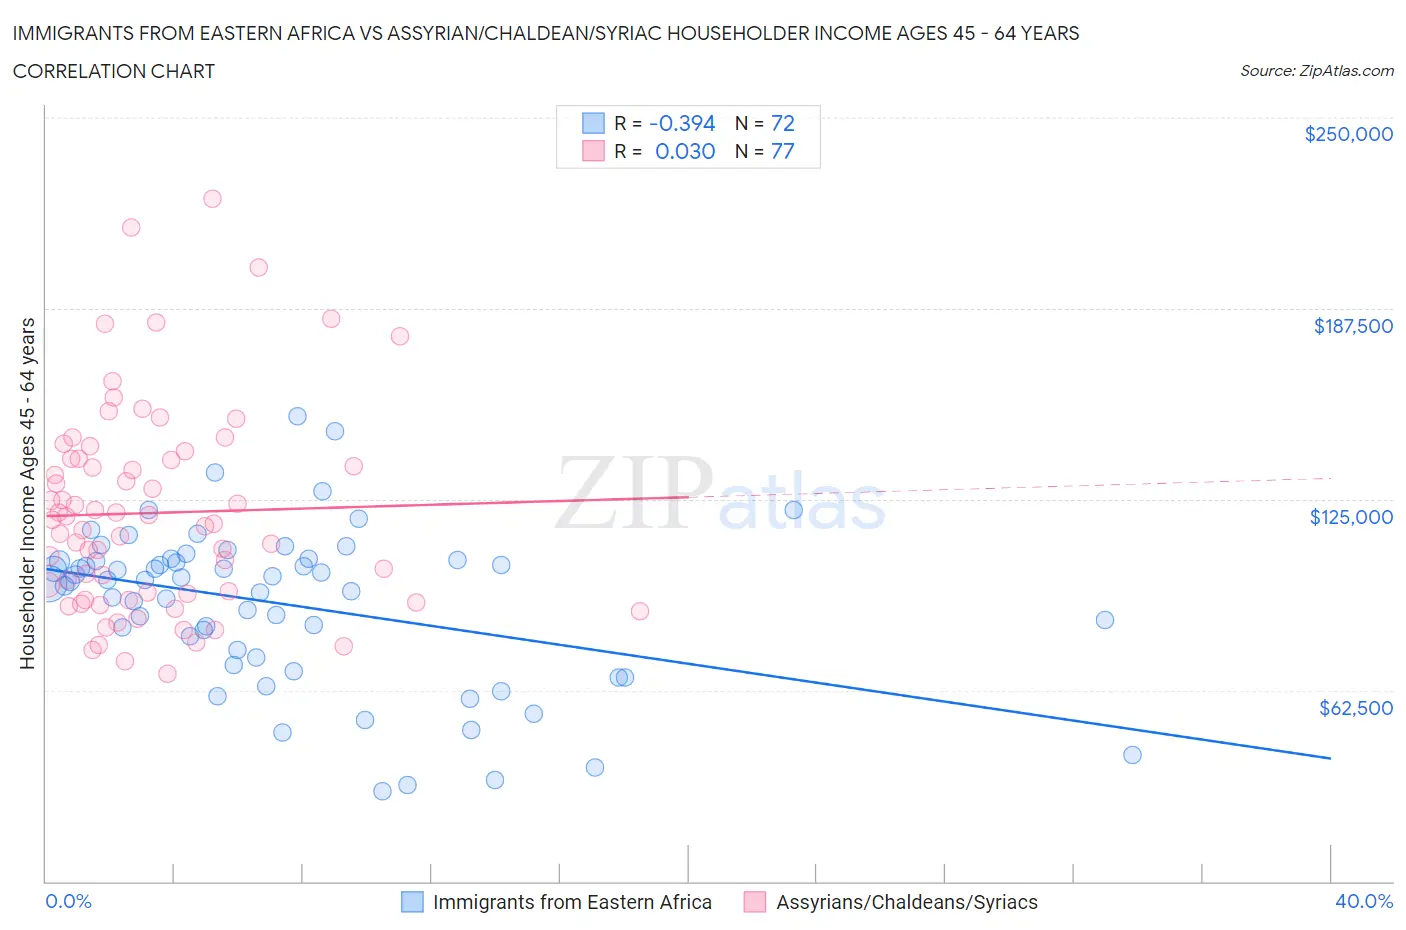 Immigrants from Eastern Africa vs Assyrian/Chaldean/Syriac Householder Income Ages 45 - 64 years